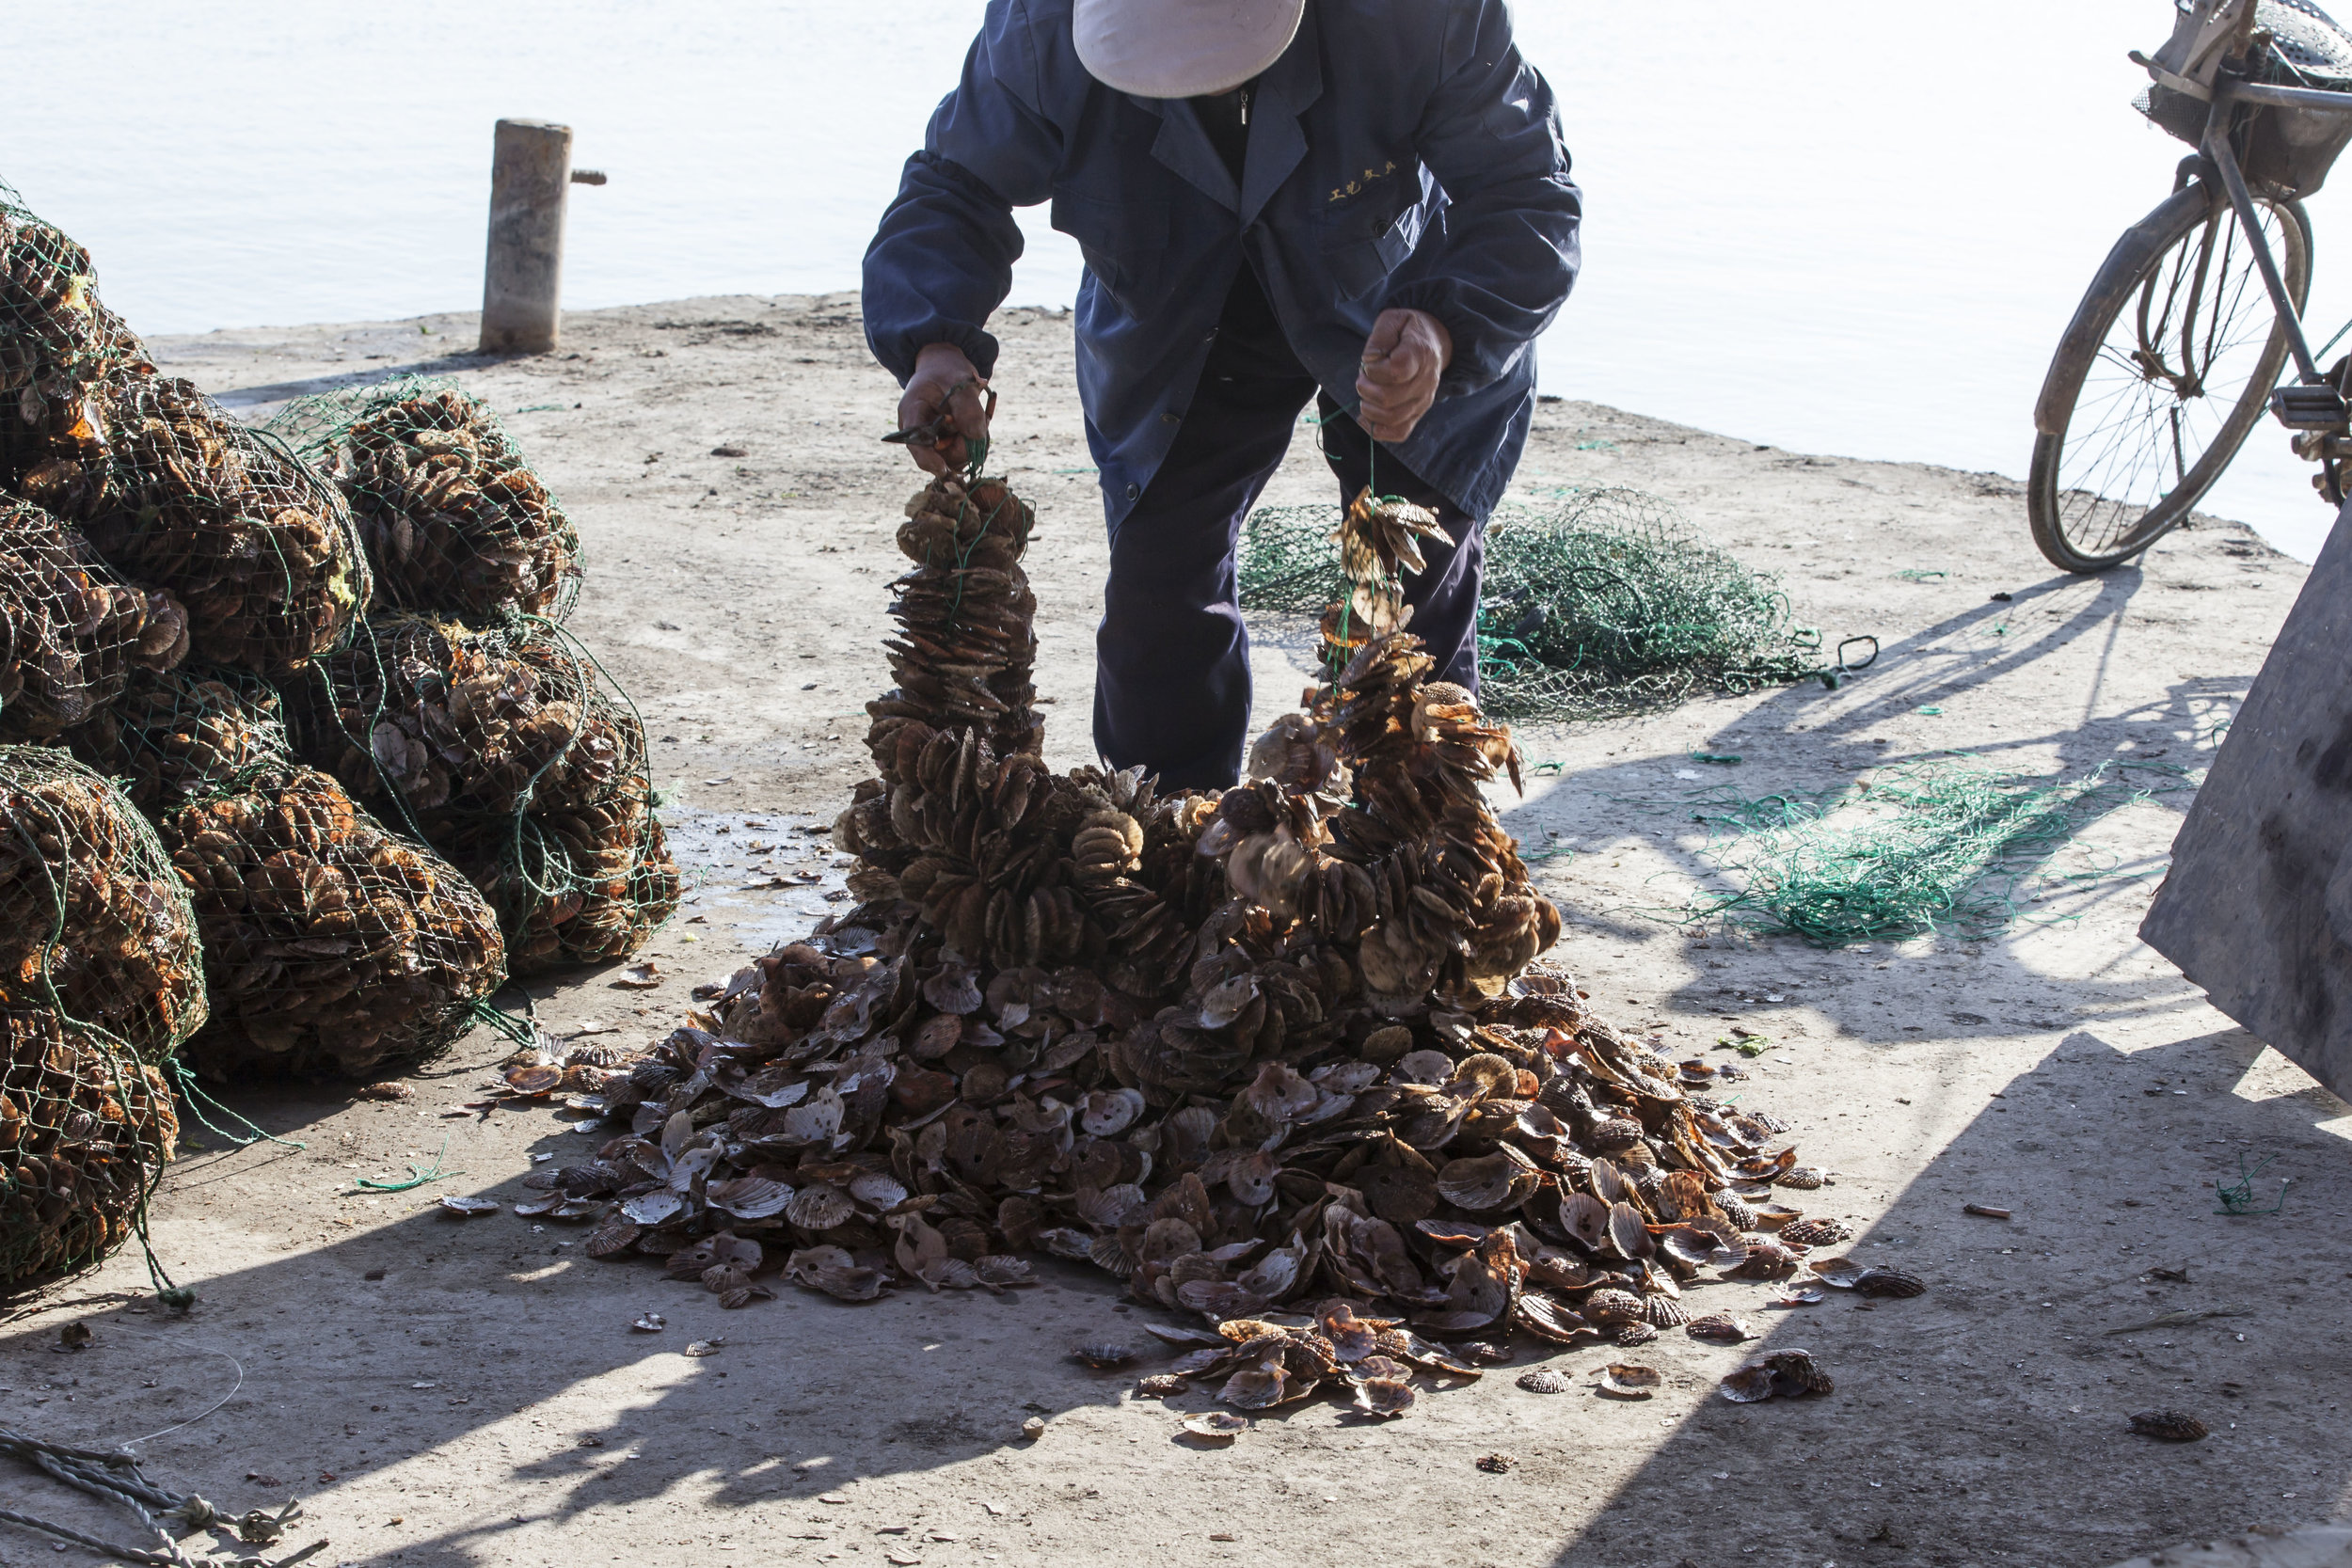  In Ya Tou Zhen, we visit a private oyster farm. In one method of cultivating oysters,&nbsp;a substrate is required onto which the oyster can attach as a 'spat' and subsequently grow.&nbsp;In Ya Tou Zhen, the substrate is old clam shells. 